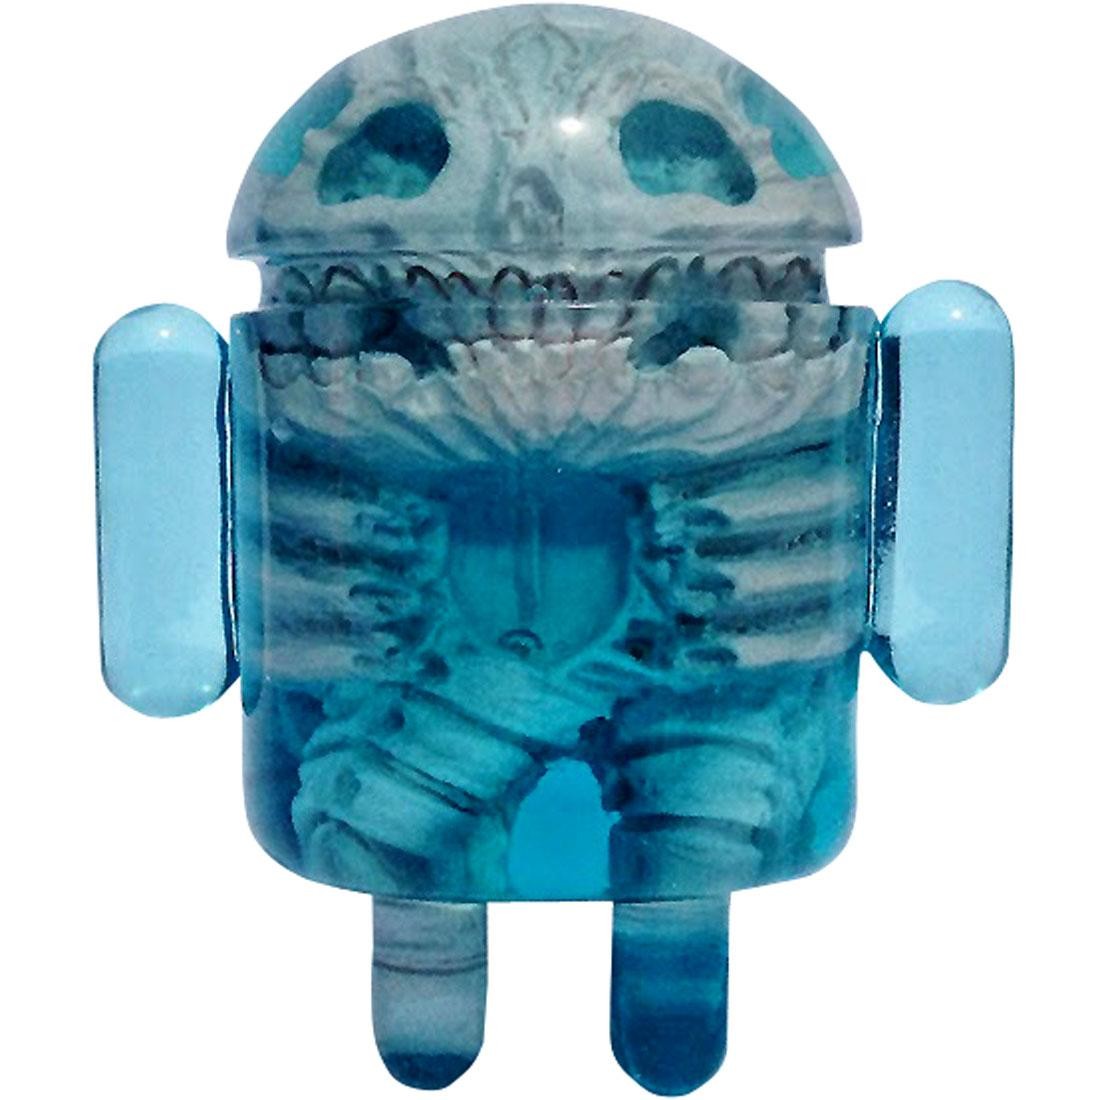 Android Foundry x Scott Wilkowski Infected Android Figure (blue) - SDCC Exclusive